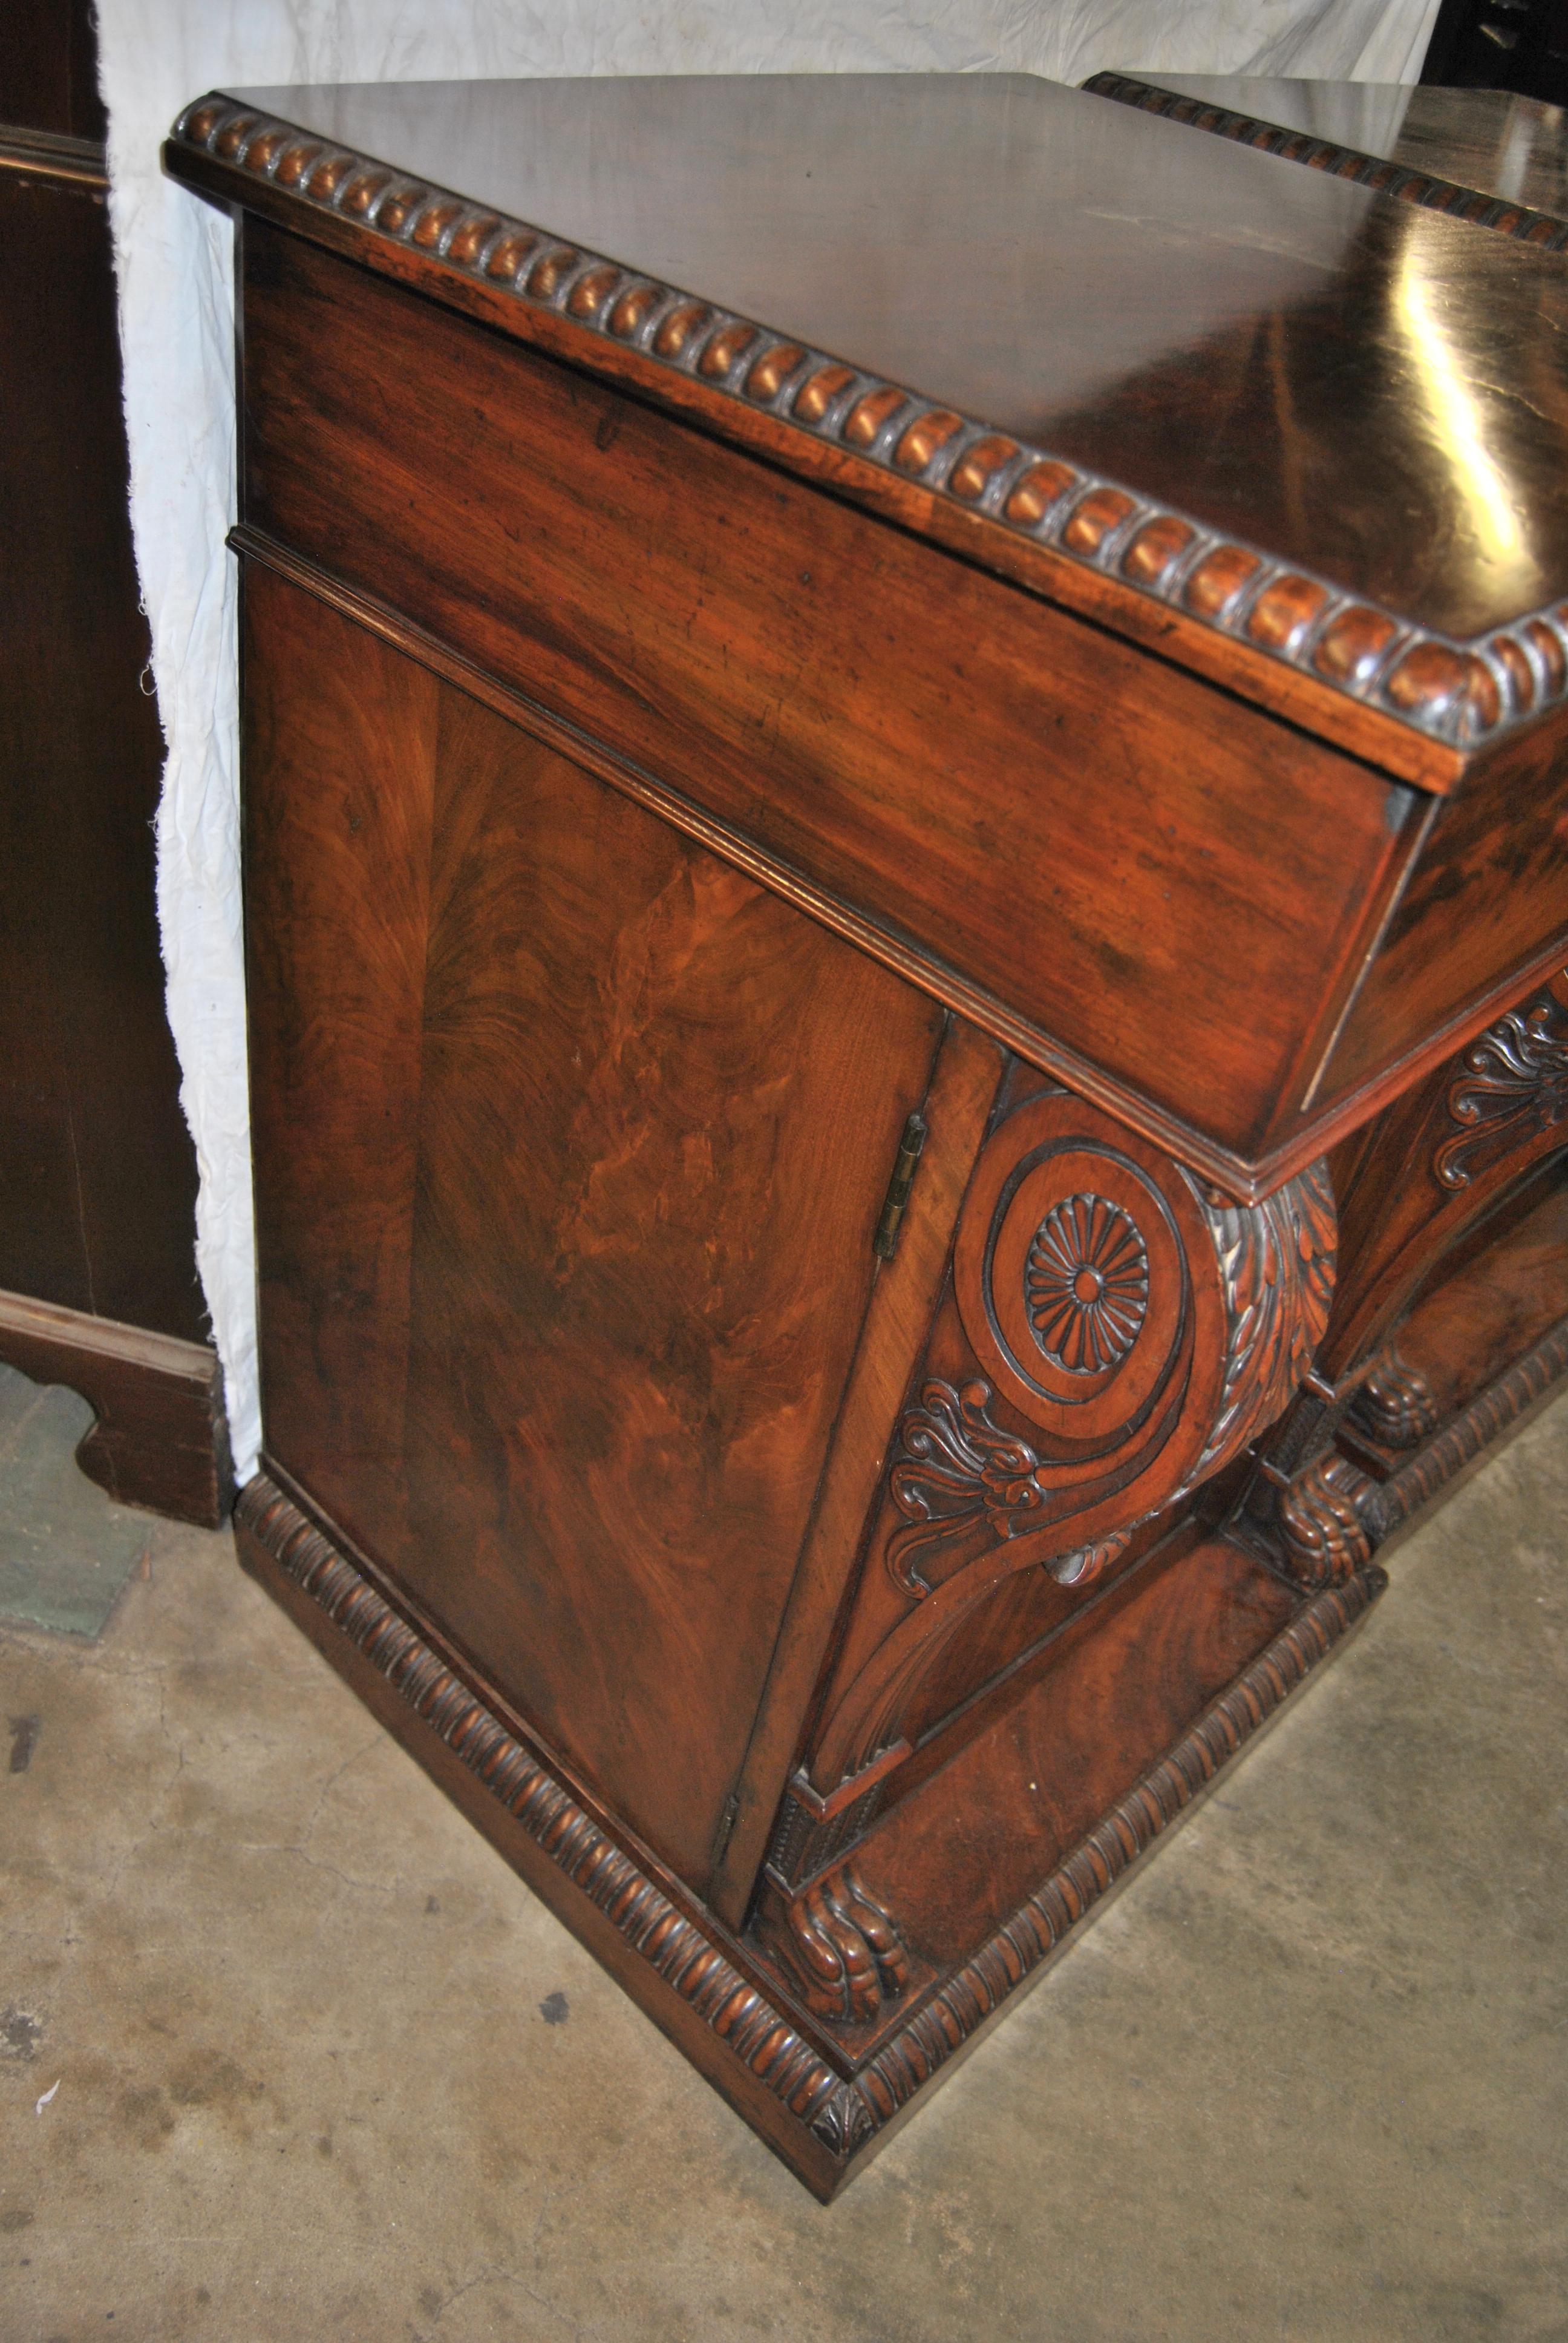 This is a matched pair of carved mahogany pedestals / stands / cabinets / cupboards made in England, circa 1860. There is a beautifully hand carved molding to the top and base of each pedestal. Each pedestal has a drawer over a cabinet door. This is